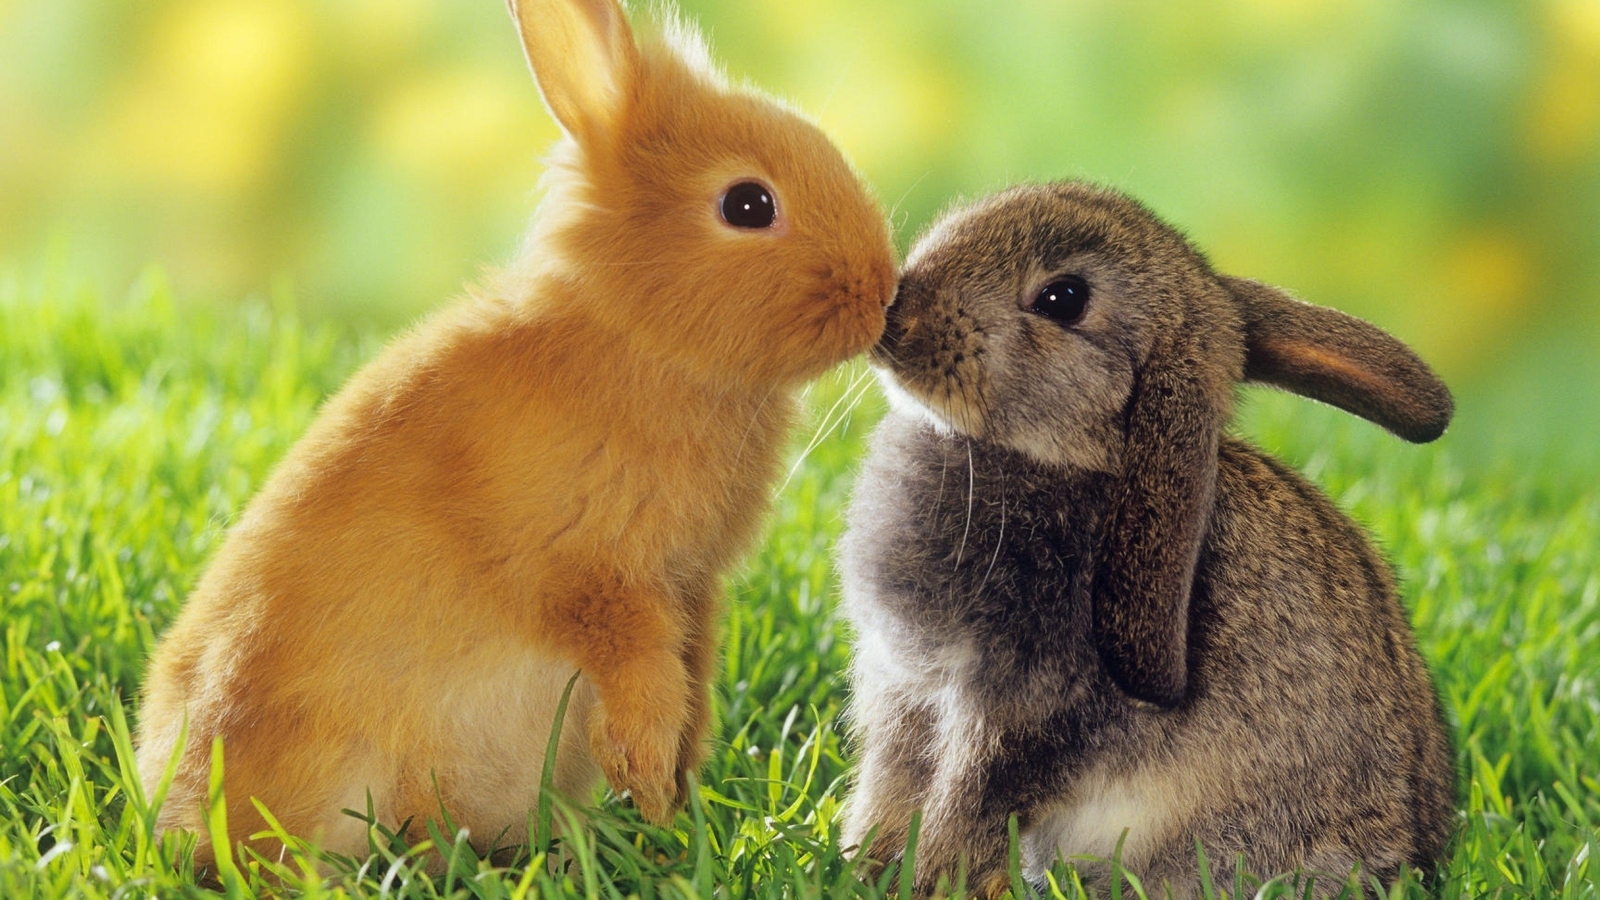 Image: Rabbits, fluffies, fur, ears, eyes, grass, lawn